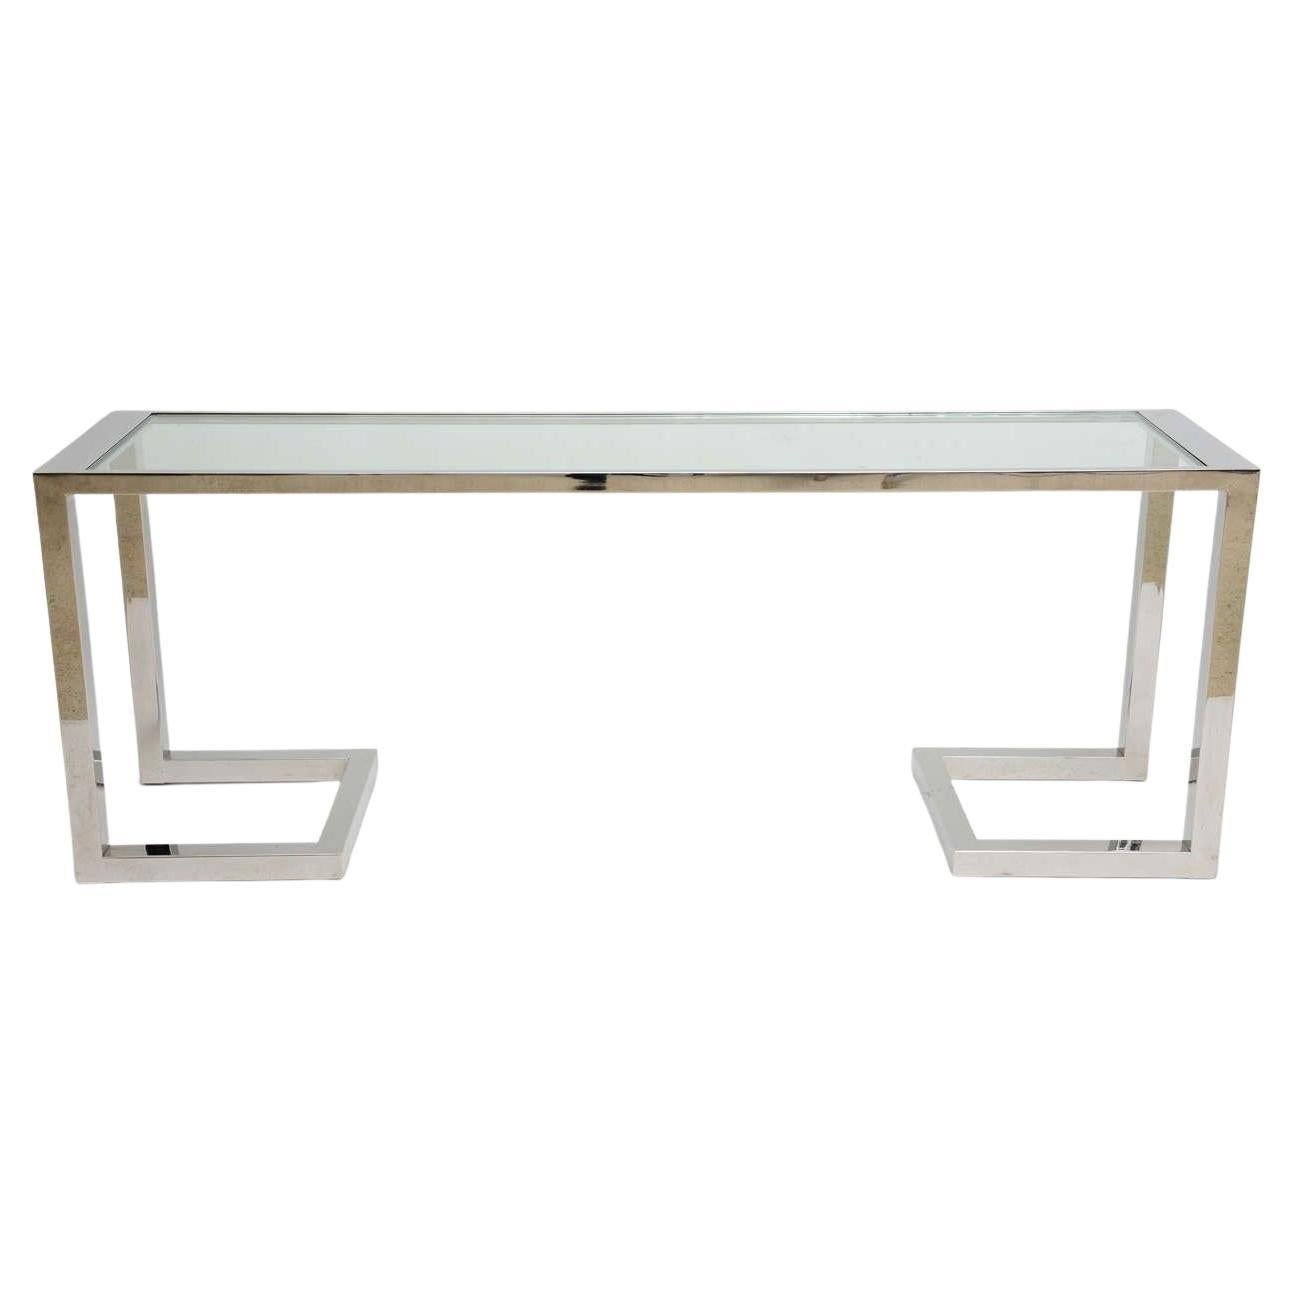 Large American Modern Polished Chrome and Glass Console, Milo Baughman Style For Sale